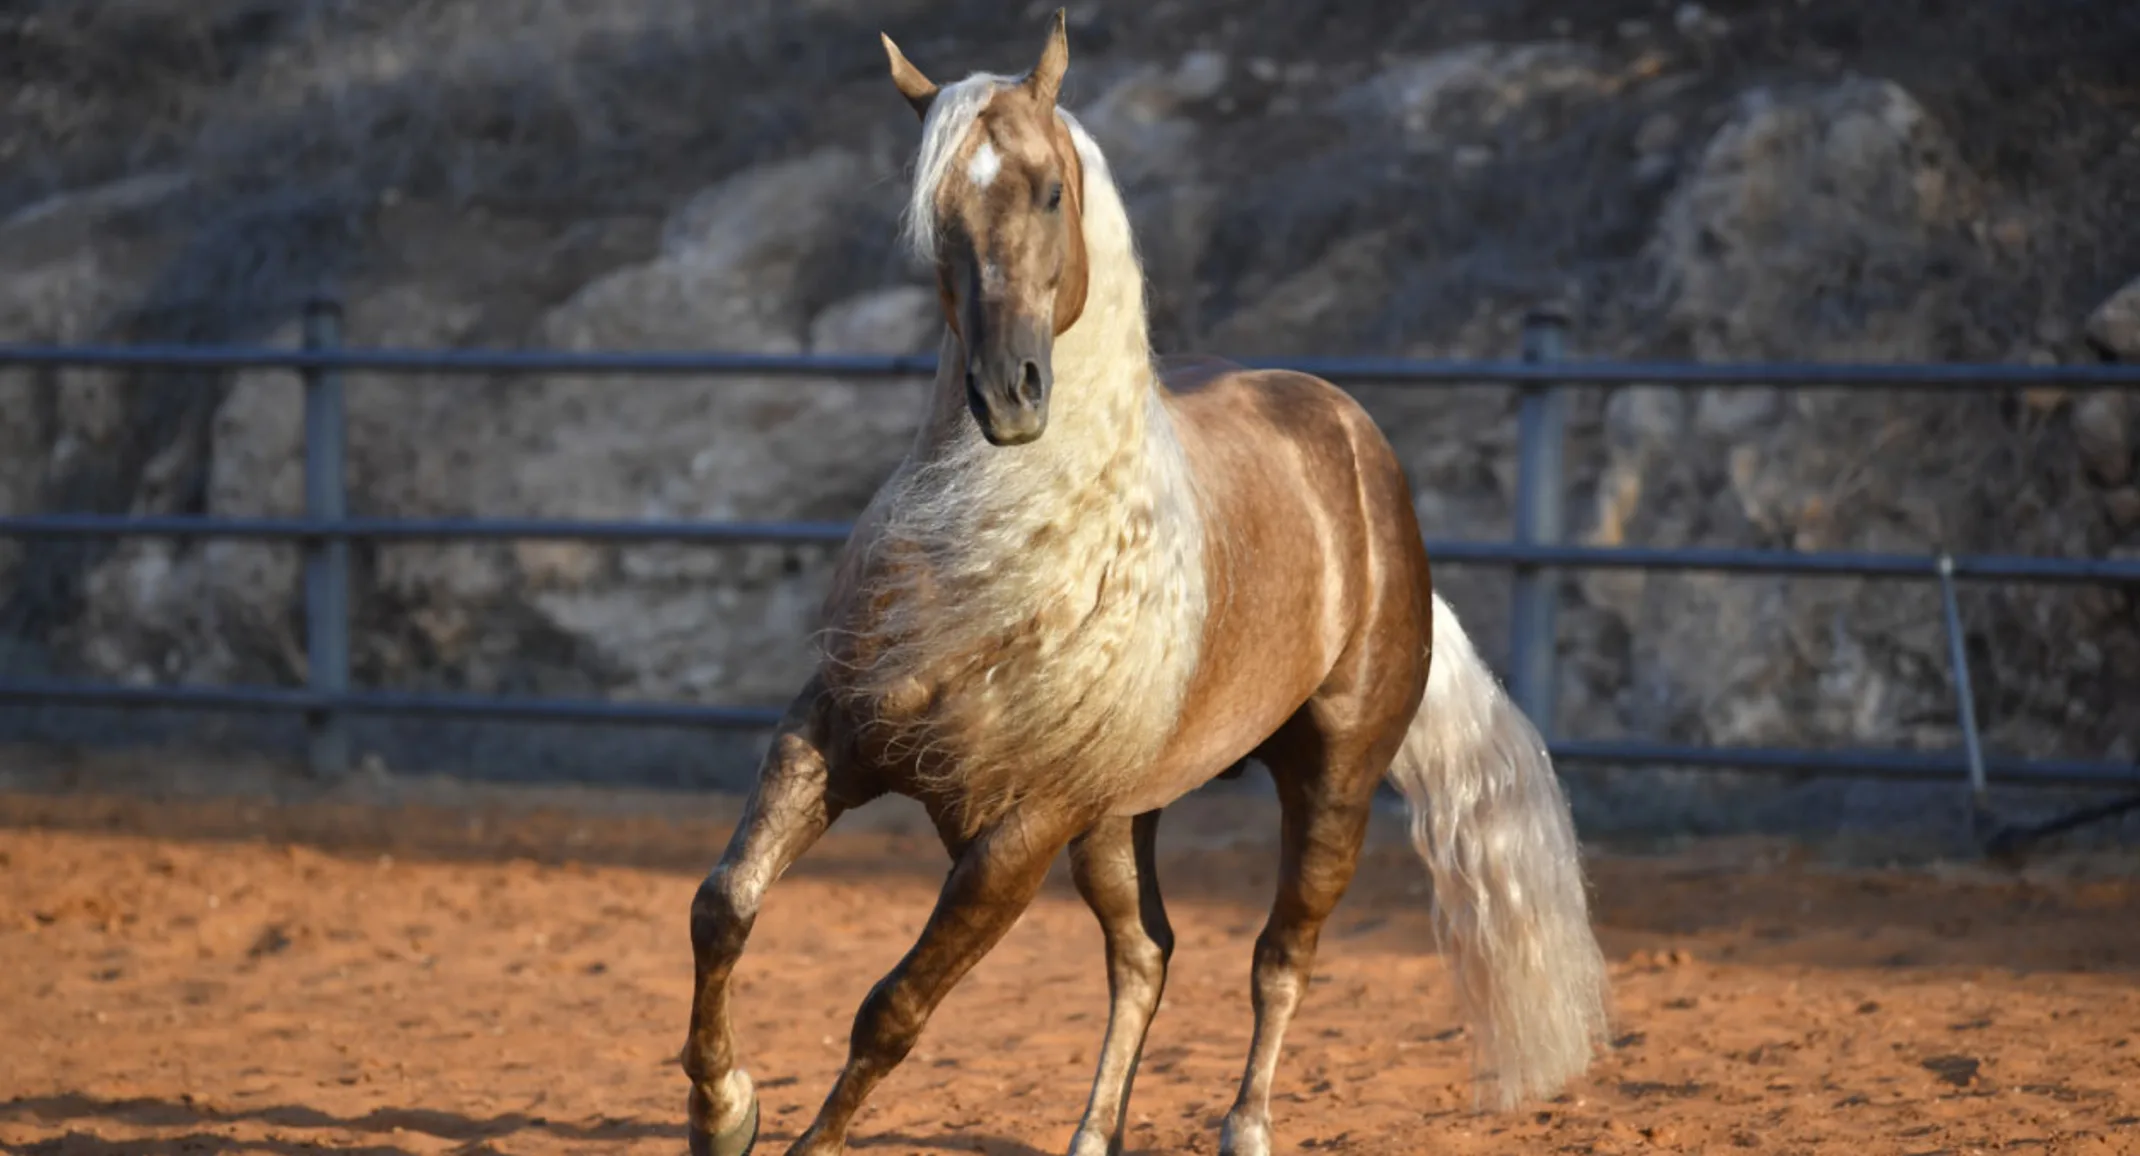 Brown horse with blonde mane standing in dusty pen